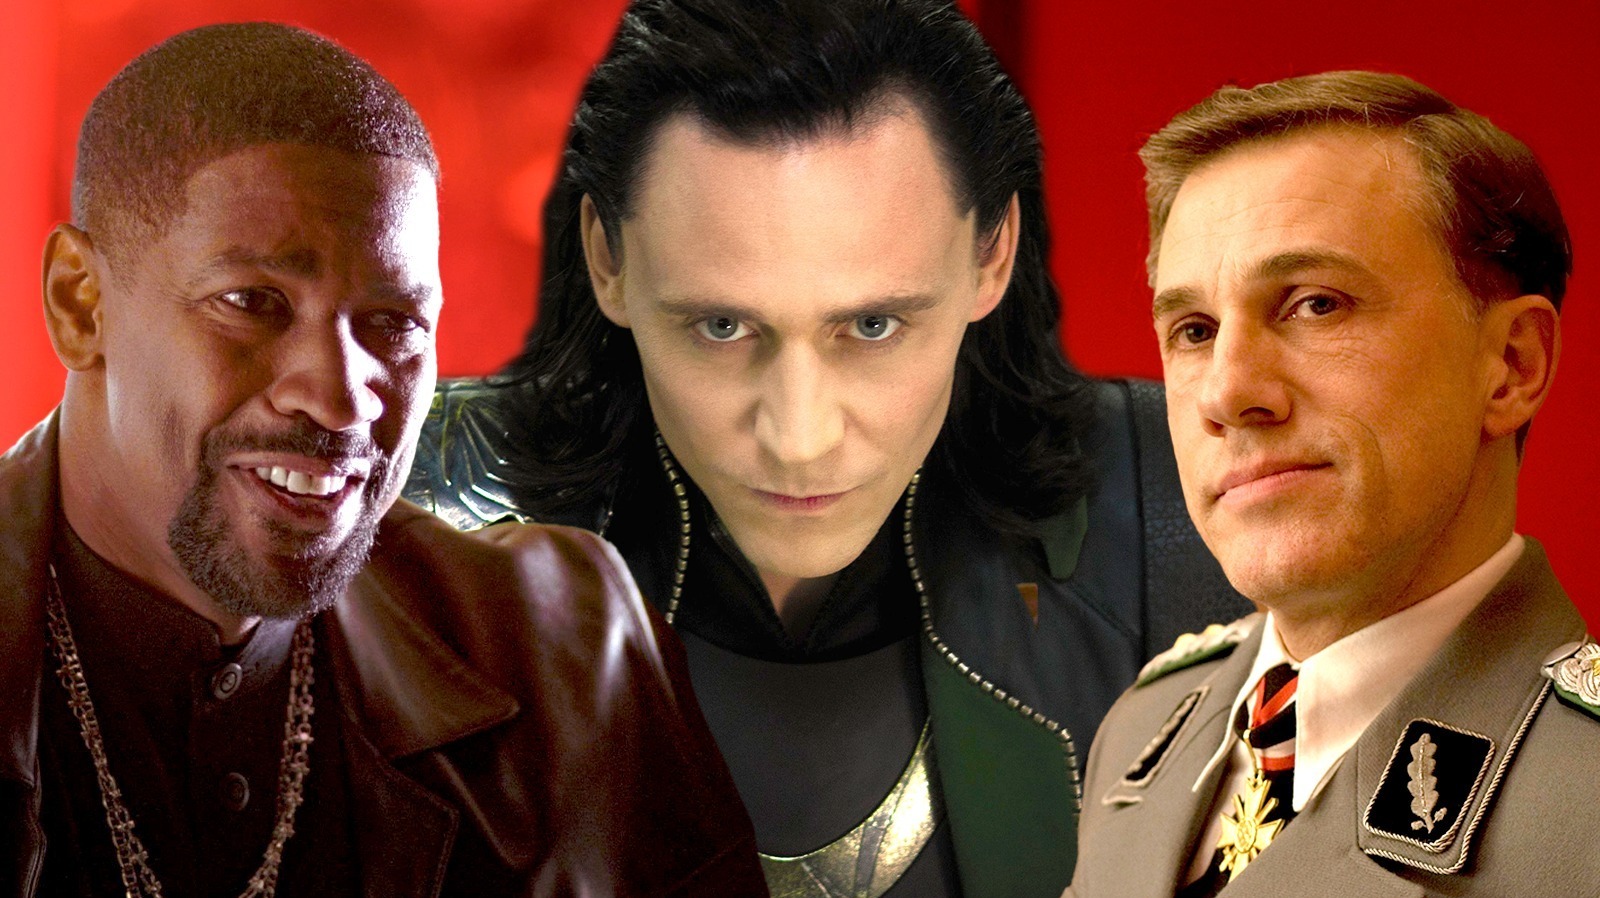 These are the Most Charismatic Villains in Film History